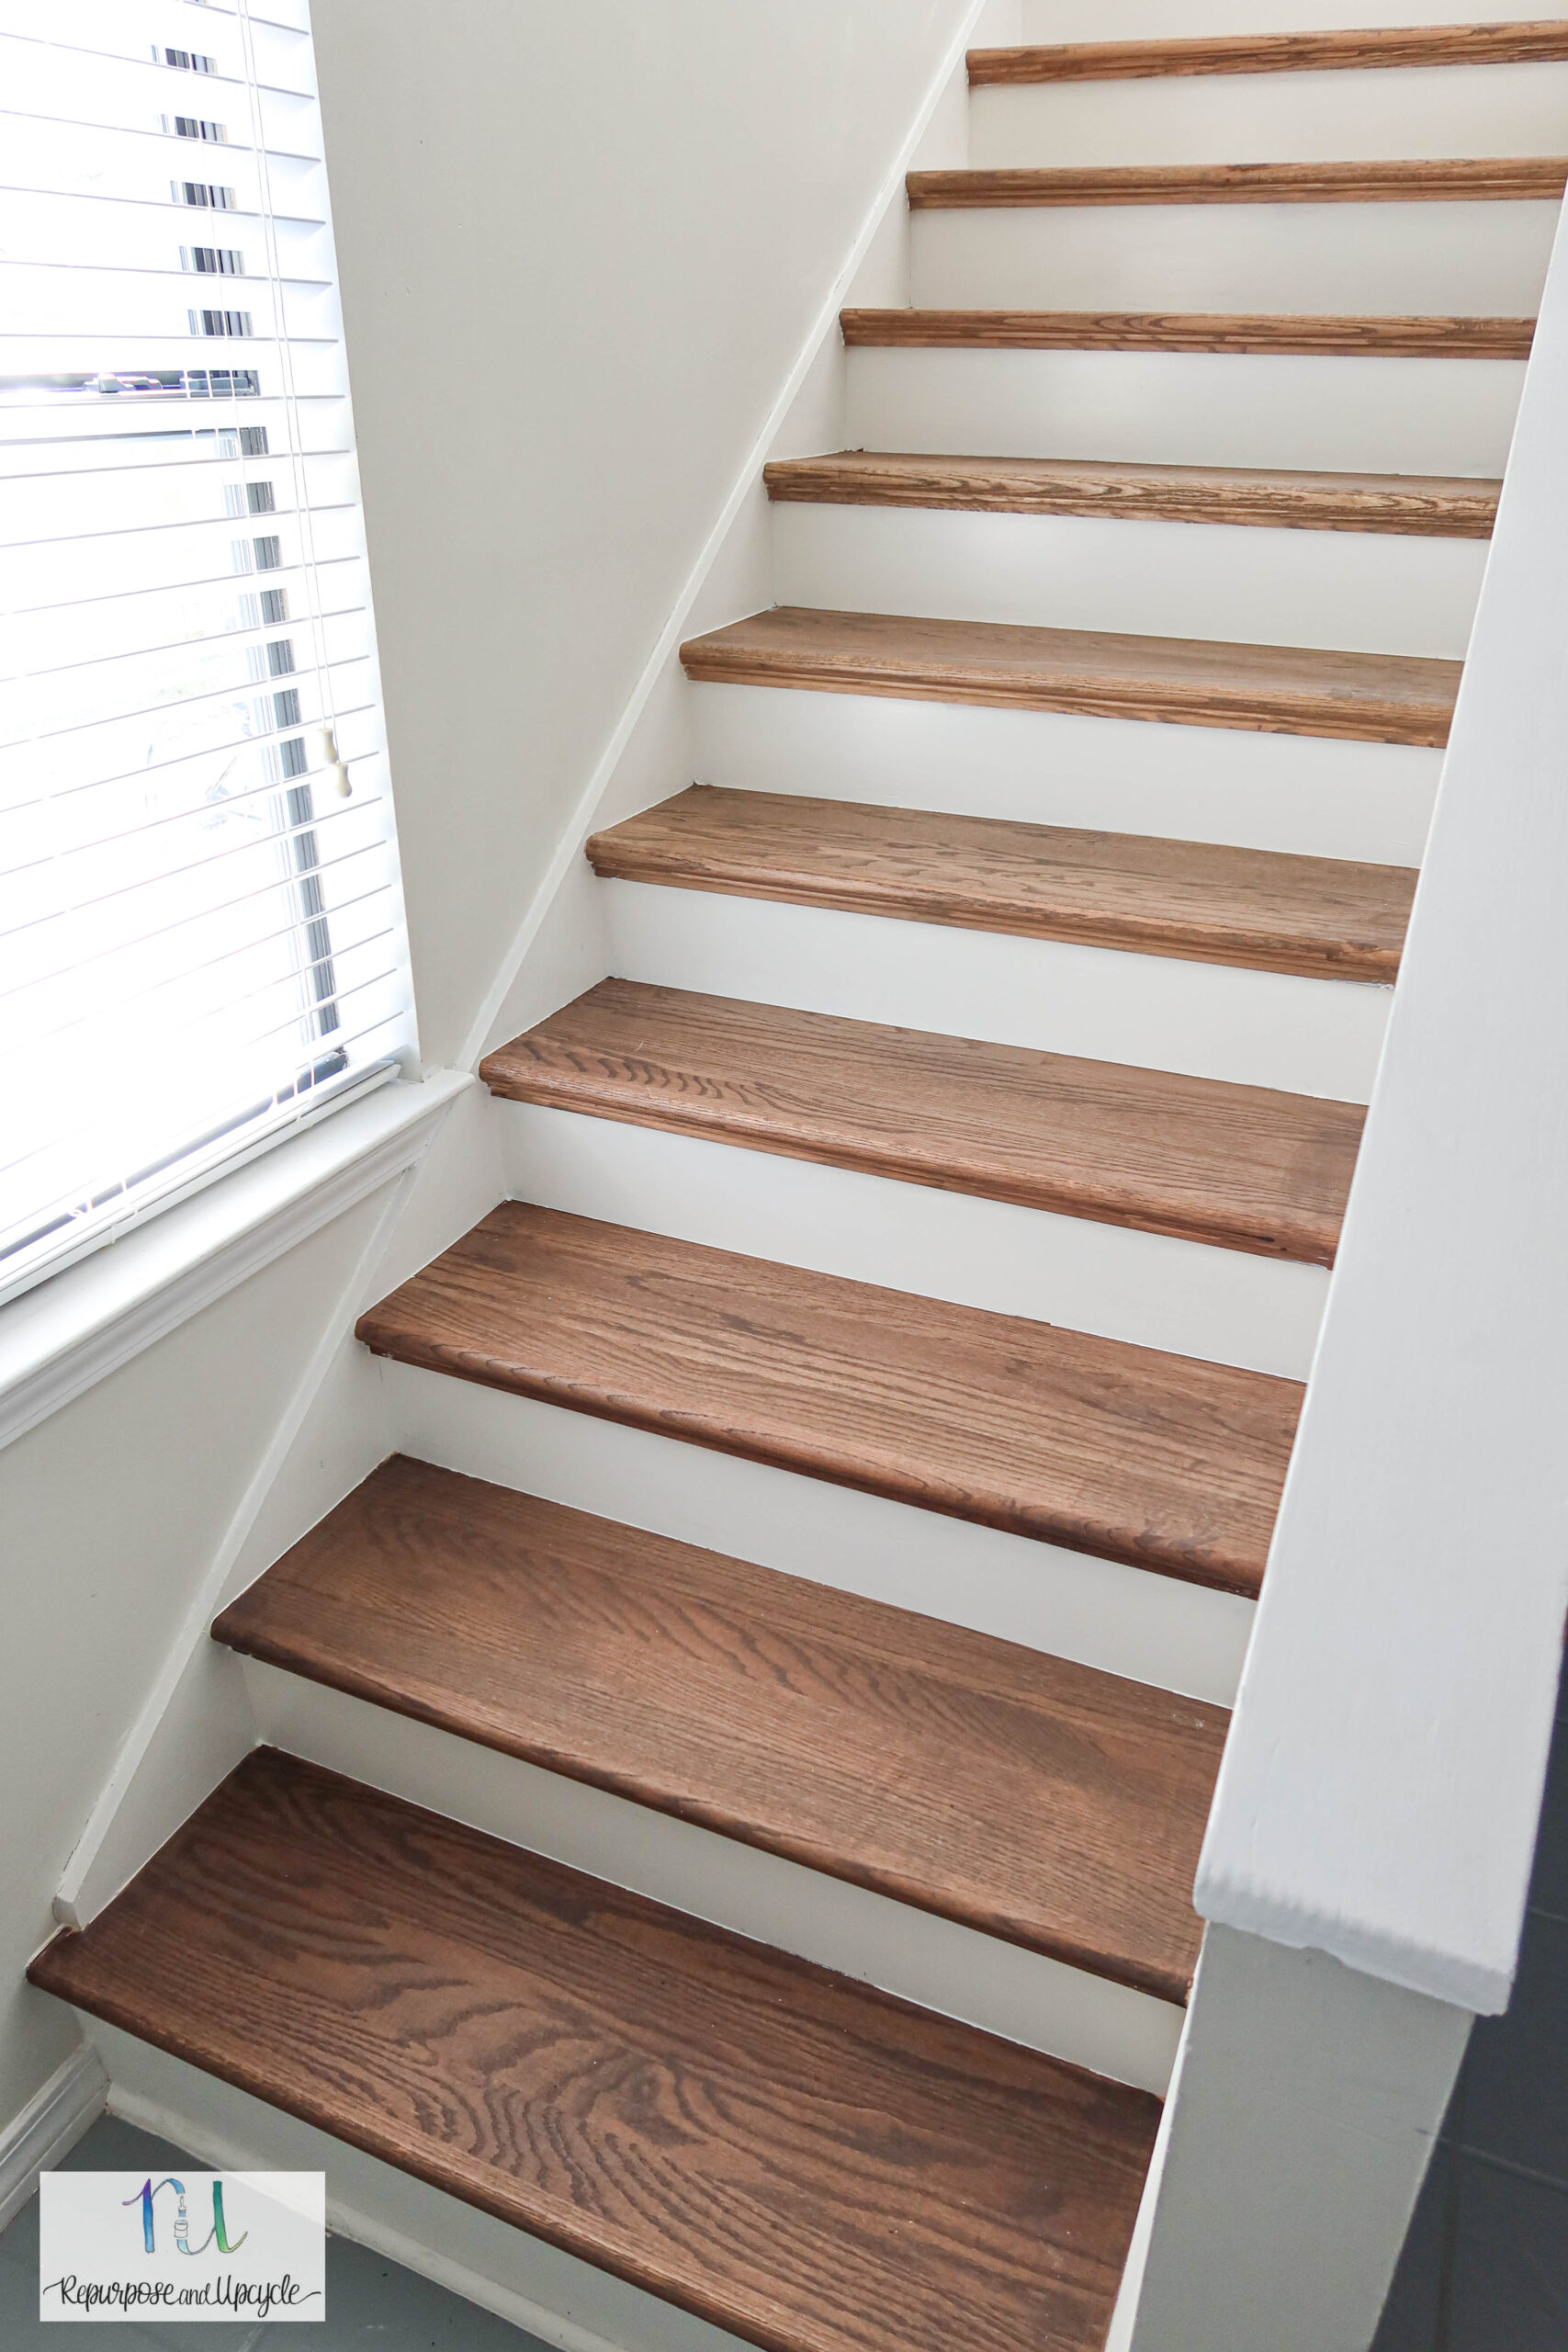 refinishing stairs with stain